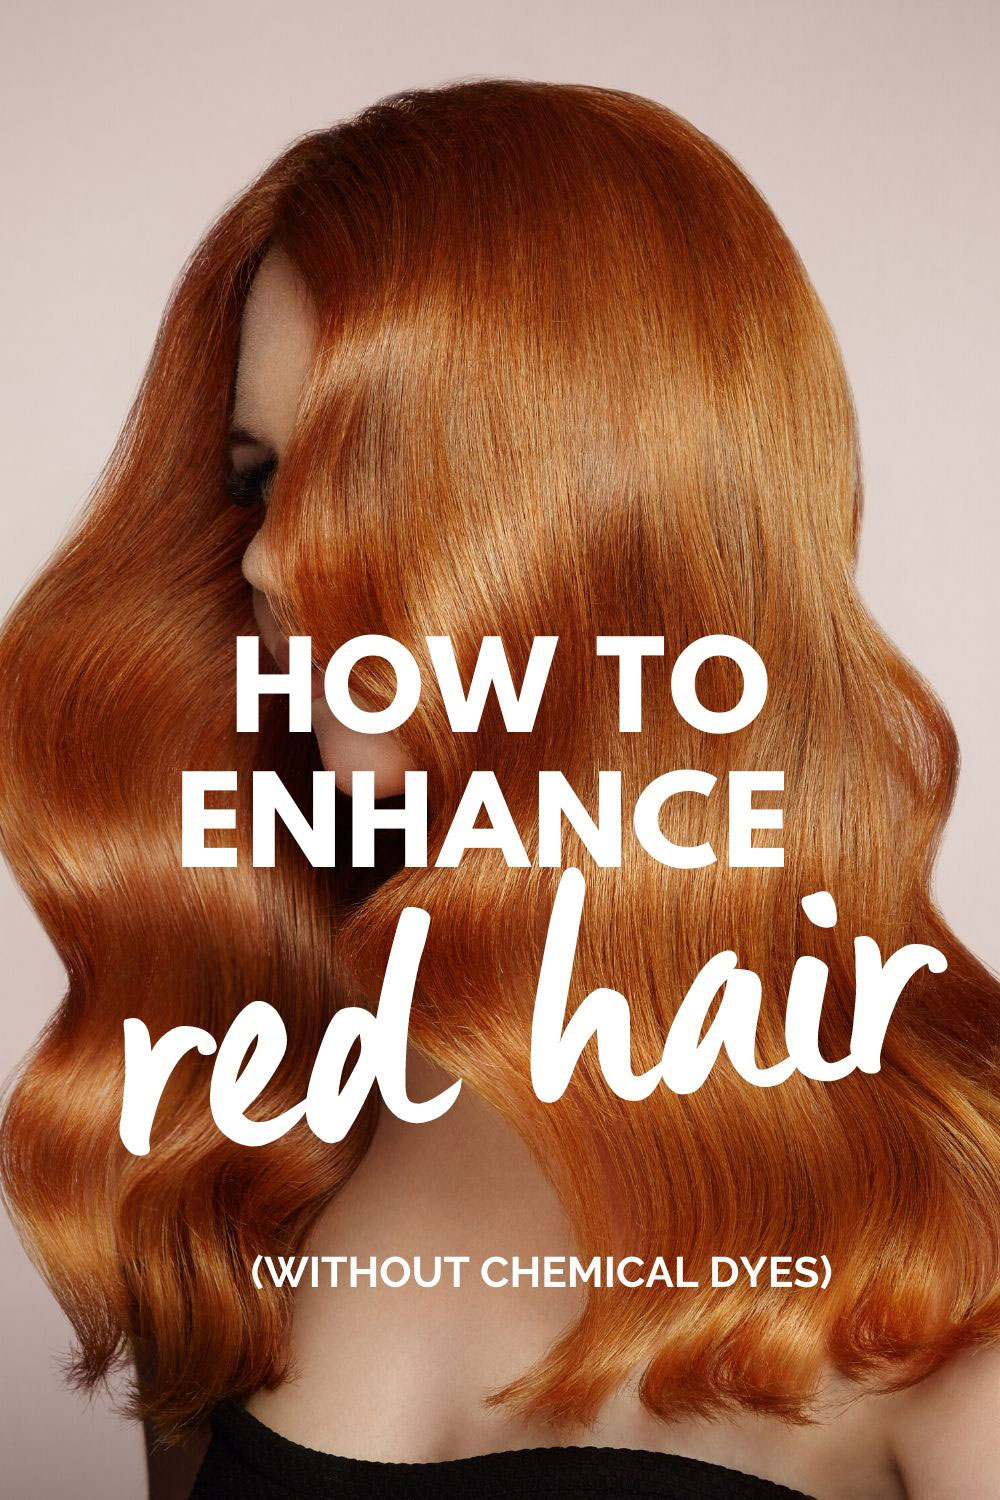 How to Enhance Natural Red Hair: 10 products for redheads